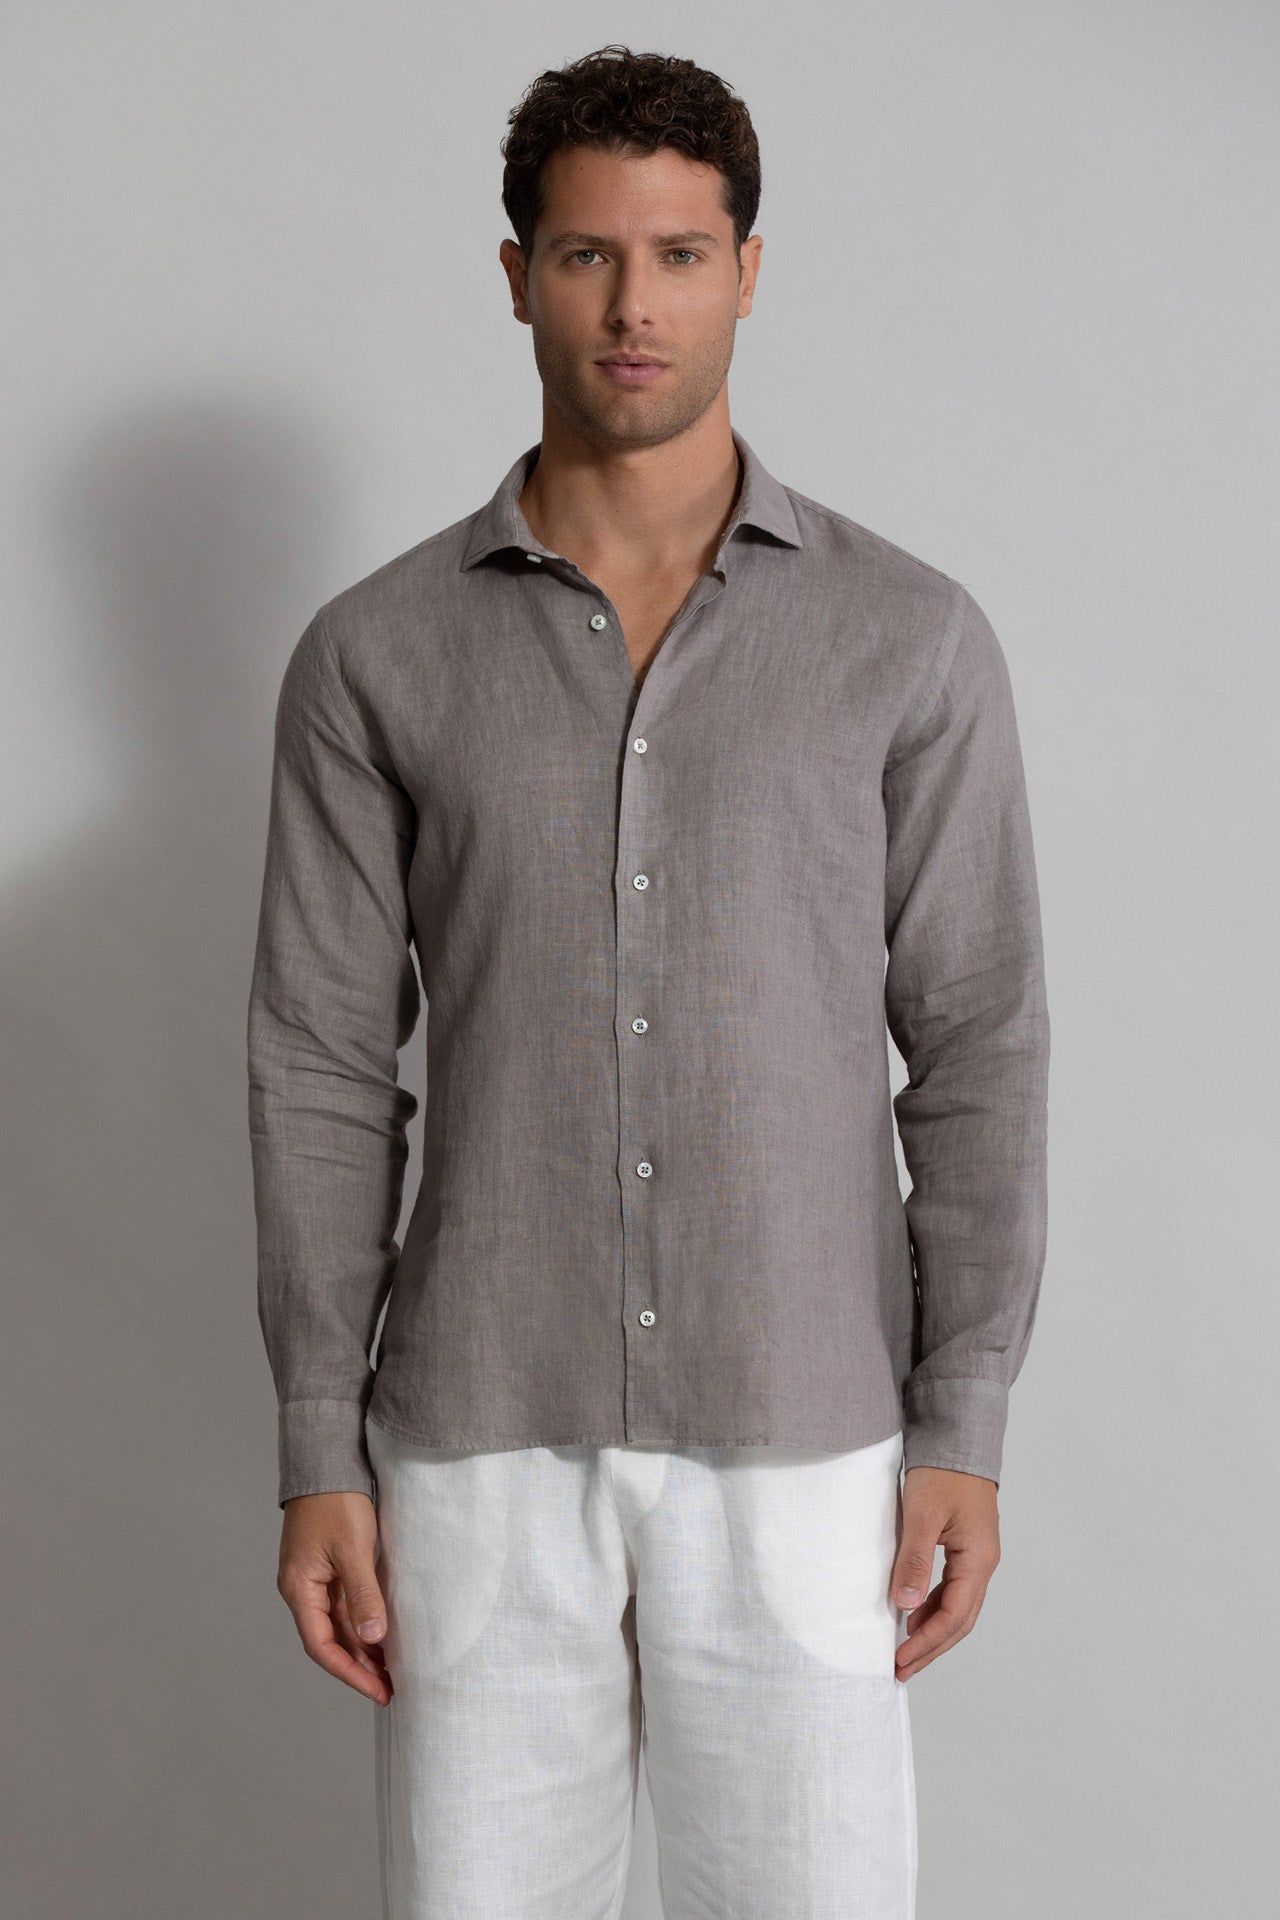 Men's Linen Shirts with Long Sleeve - Grey - Front view